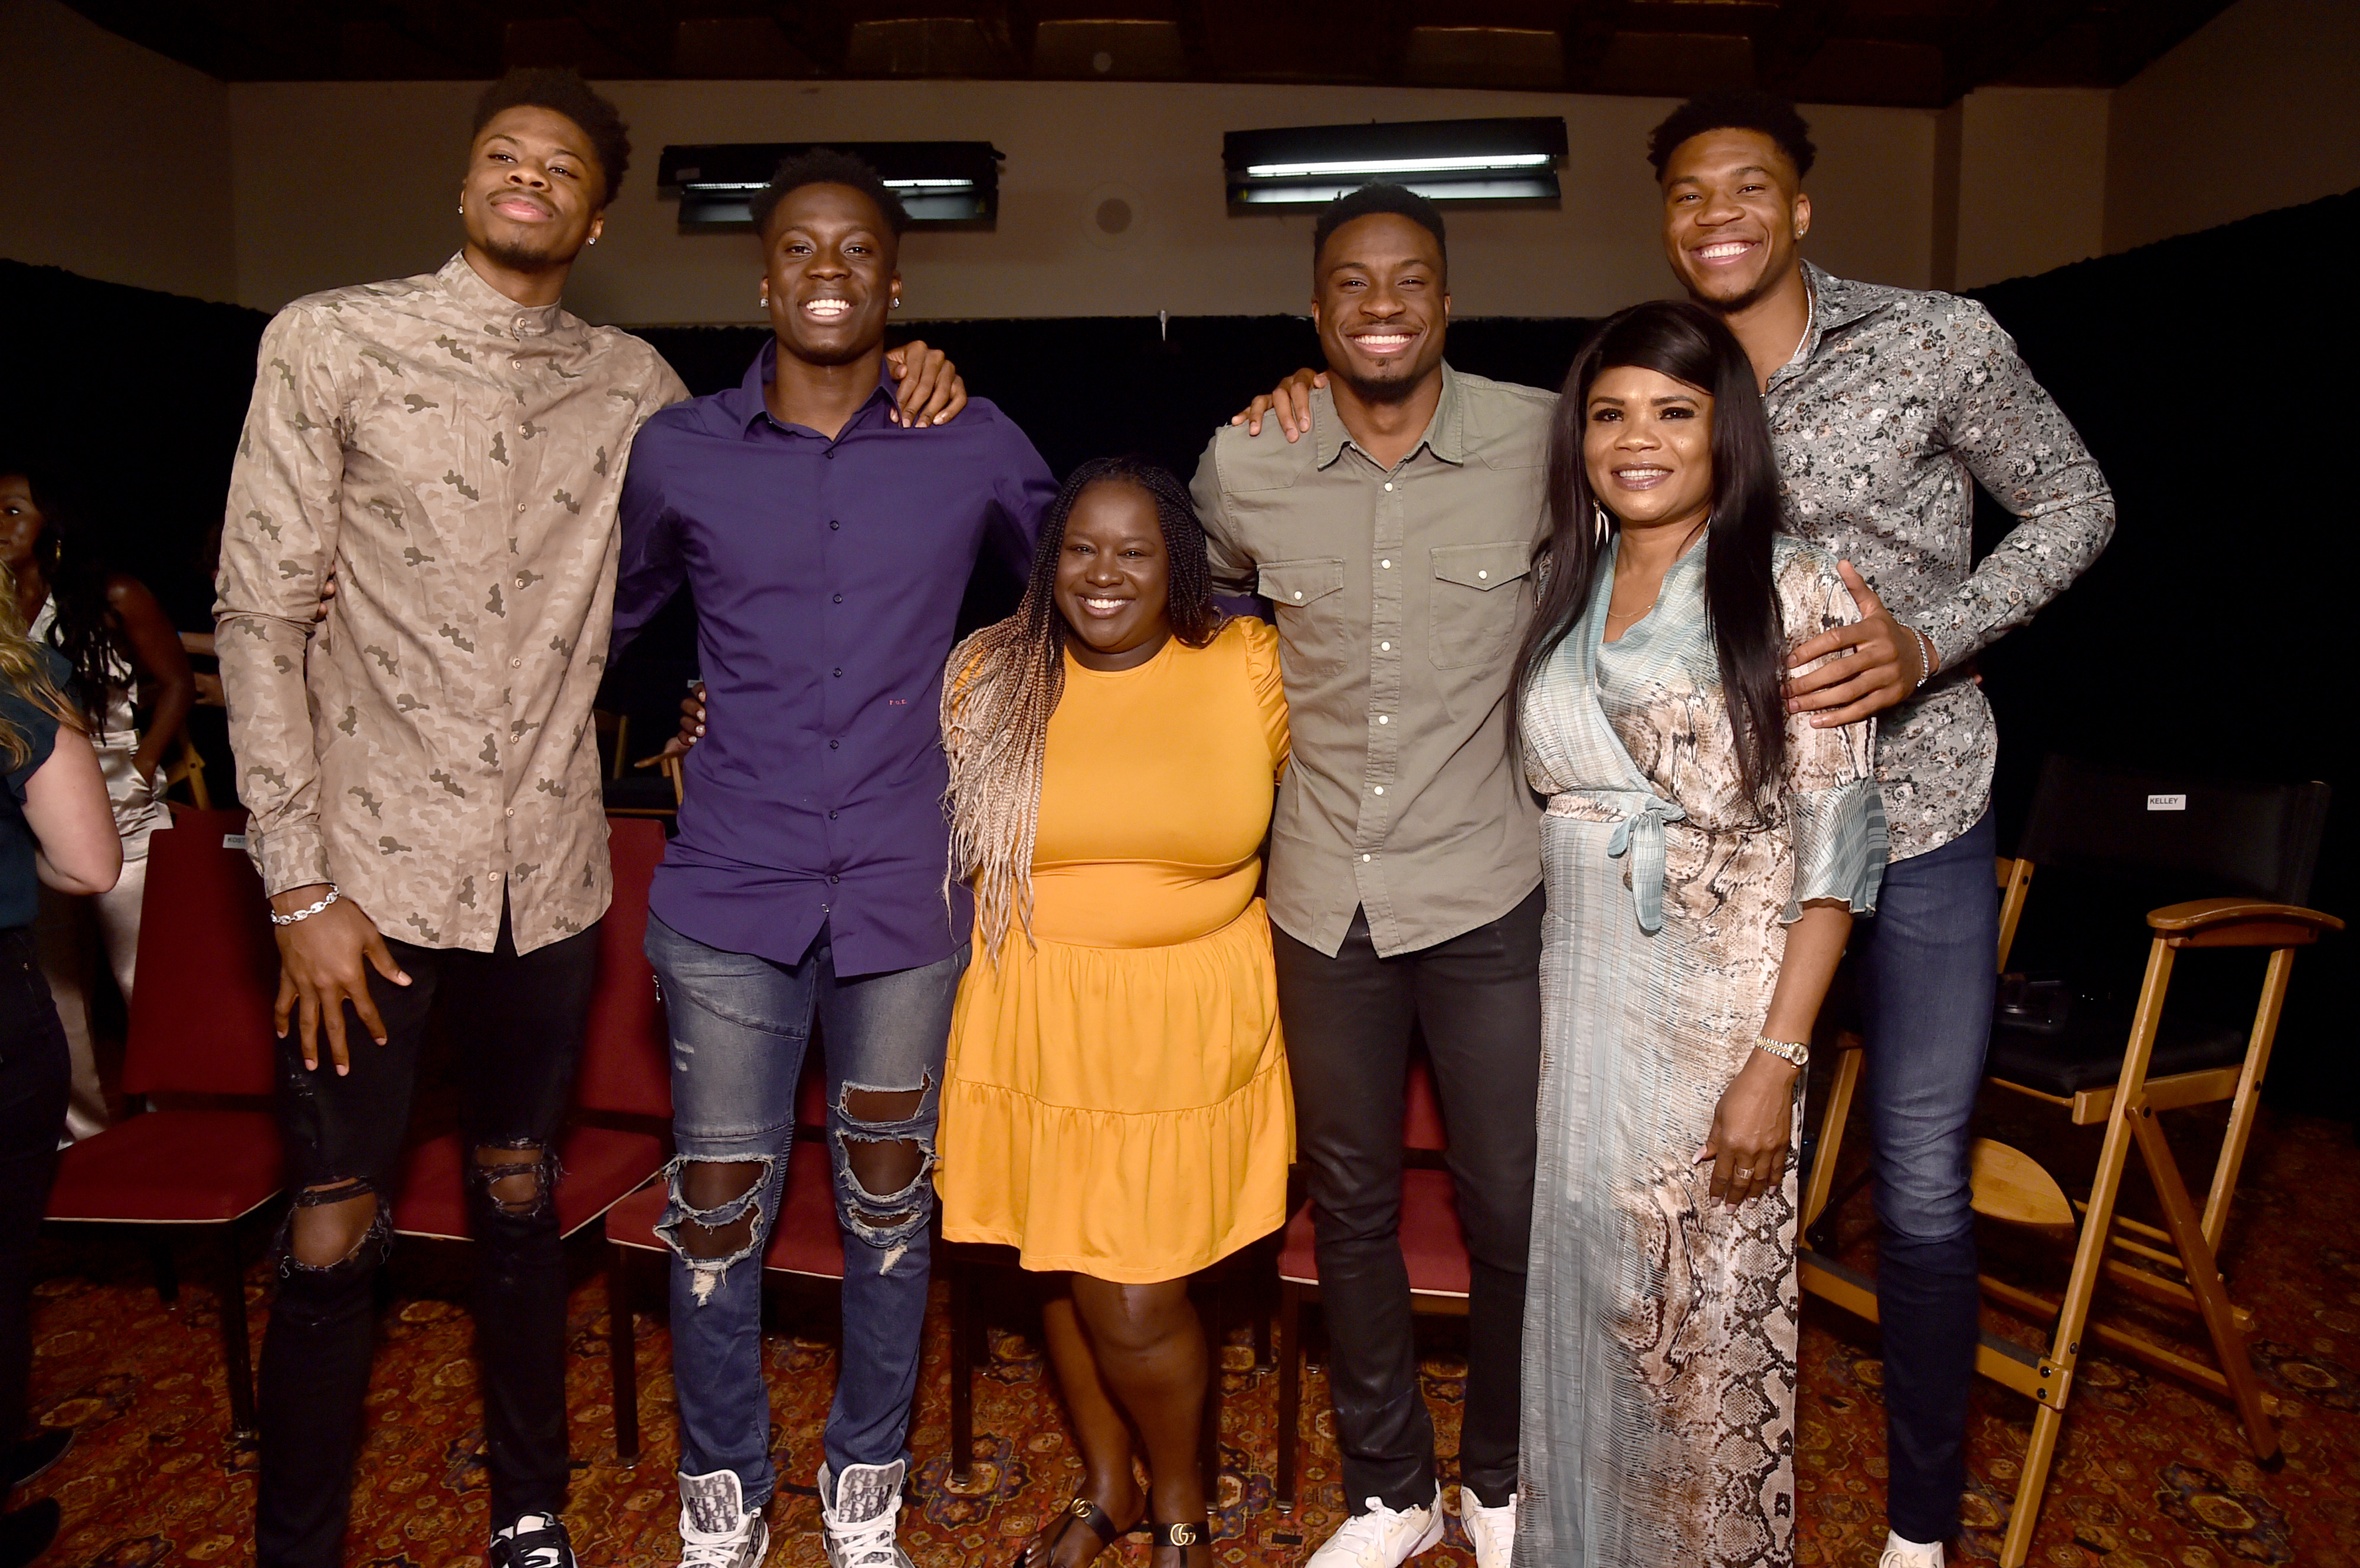 Kelley L. Carter, Kostas,  Alex, Thanasis, Veronica, and Giannis Antetokounmpo during press for "Rise" in Los Angeles, California, on June 21, 2022. | Source: Getty Images